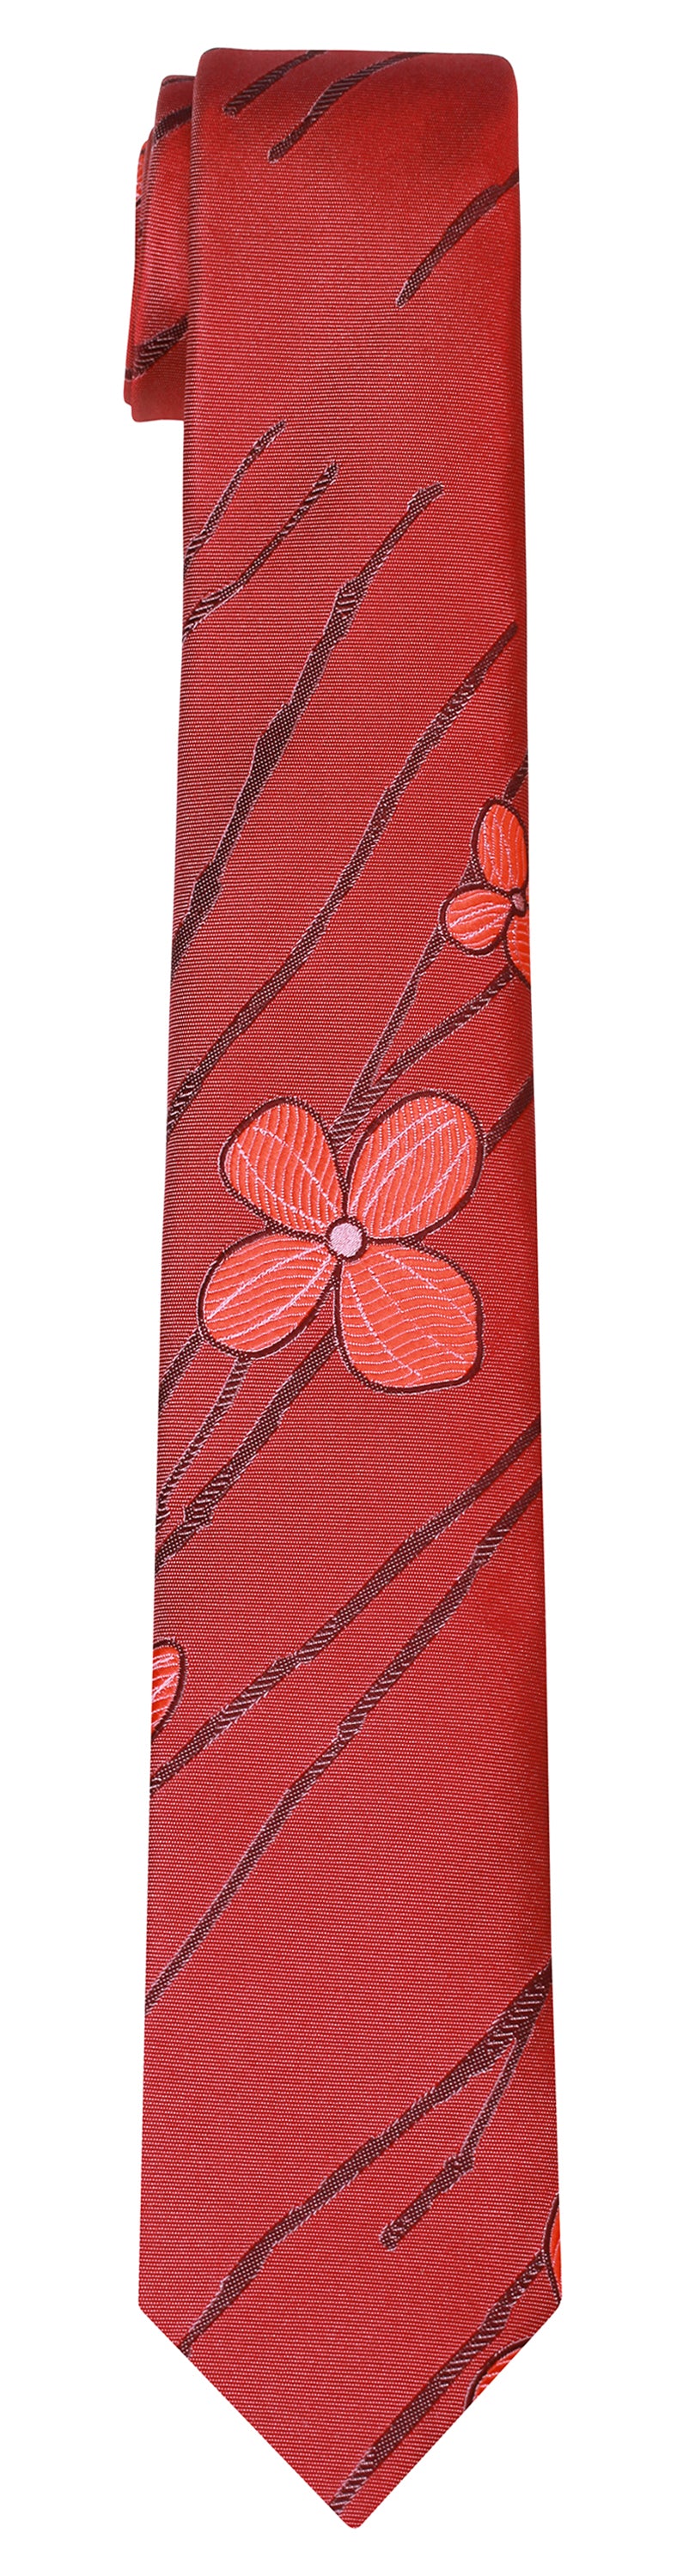 Mimi Fong Flower & Thatch Tie in Red